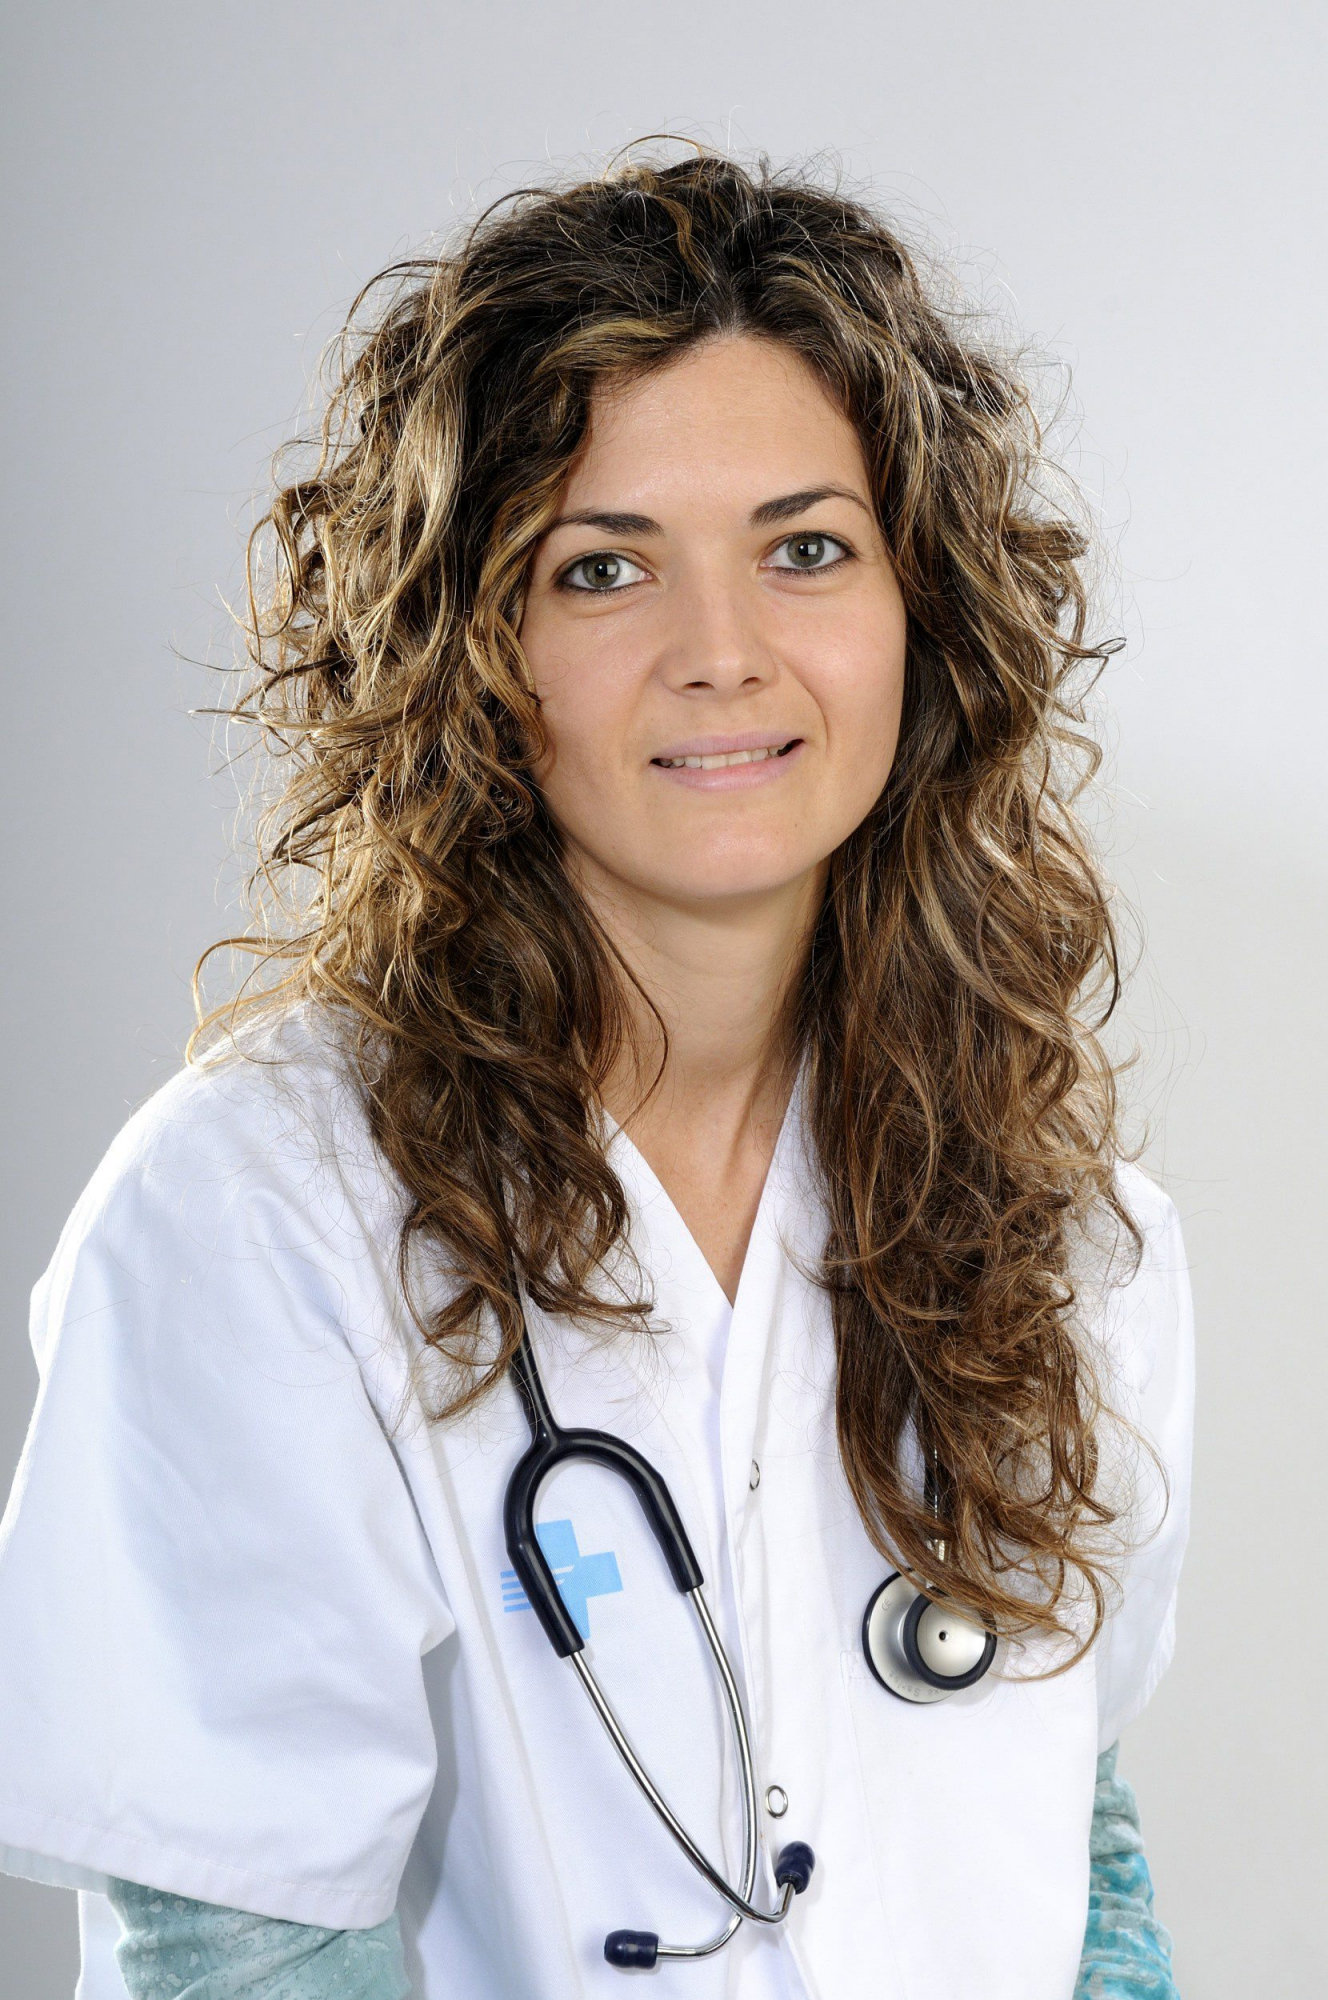 The unit is coordinated by Dr. María José Peiró, a family medicine specialist with more than 10 years of experience in the public and private sectors. Master in Nutrition and Dietetics.